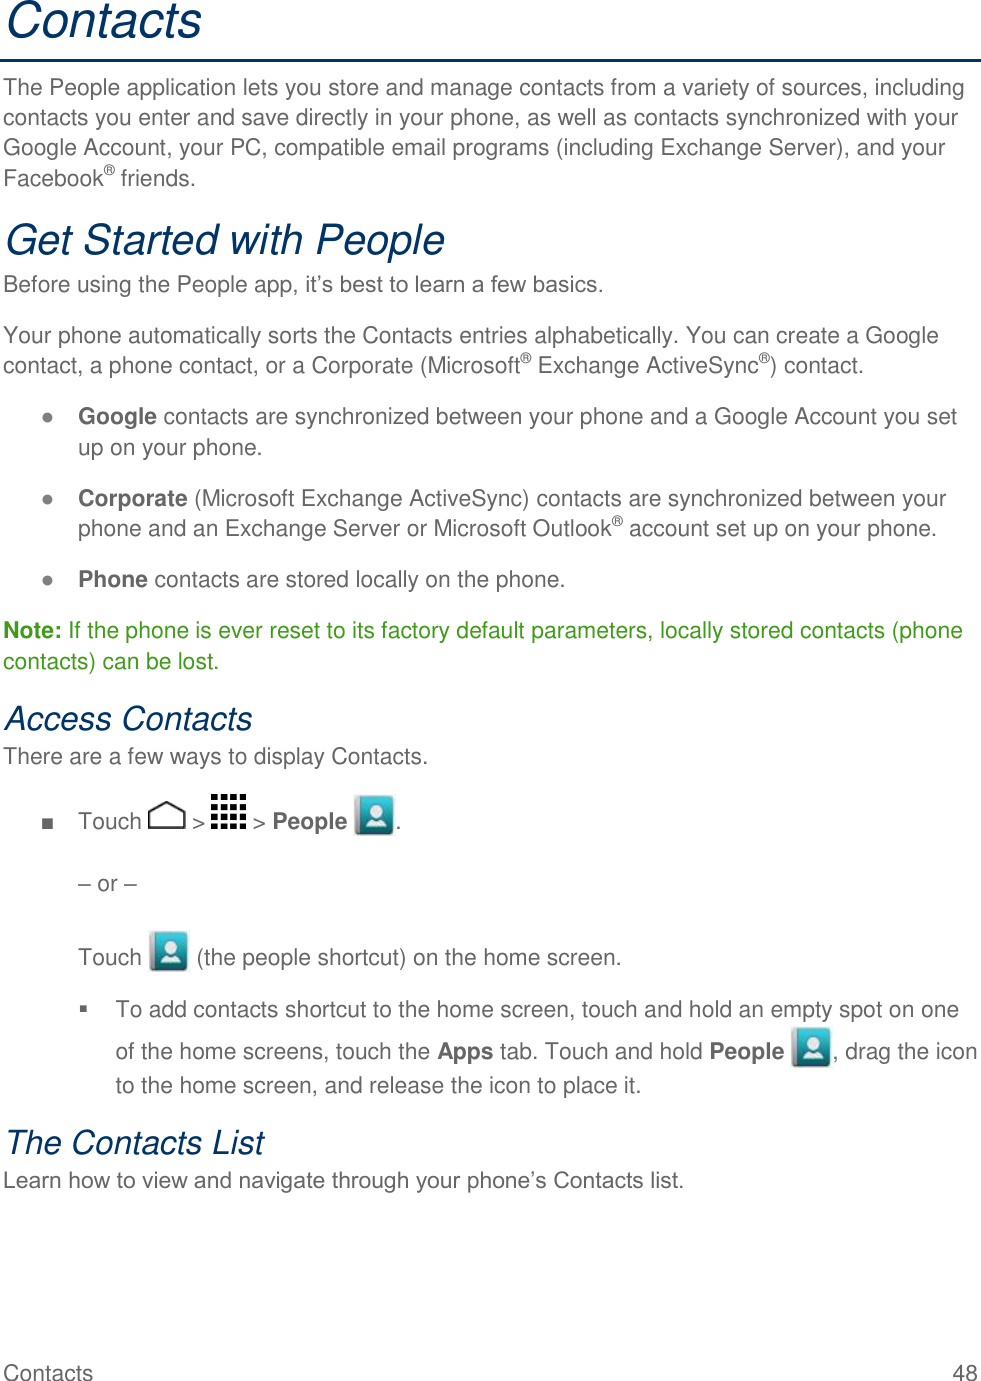 Contacts    48 Contacts The People application lets you store and manage contacts from a variety of sources, including contacts you enter and save directly in your phone, as well as contacts synchronized with your Google Account, your PC, compatible email programs (including Exchange Server), and your Facebook® friends.  Get Started with People Before using the People app, it’s best to learn a few basics. Your phone automatically sorts the Contacts entries alphabetically. You can create a Google contact, a phone contact, or a Corporate (Microsoft® Exchange ActiveSync®) contact. ● Google contacts are synchronized between your phone and a Google Account you set up on your phone. ● Corporate (Microsoft Exchange ActiveSync) contacts are synchronized between your phone and an Exchange Server or Microsoft Outlook® account set up on your phone. ● Phone contacts are stored locally on the phone. Note: If the phone is ever reset to its factory default parameters, locally stored contacts (phone contacts) can be lost. Access Contacts There are a few ways to display Contacts. ■  Touch   &gt;   &gt; People  .  – or –  Touch   (the people shortcut) on the home screen.   To add contacts shortcut to the home screen, touch and hold an empty spot on one of the home screens, touch the Apps tab. Touch and hold People  , drag the icon to the home screen, and release the icon to place it. The Contacts List Learn how to view and navigate through your phone’s Contacts list. 